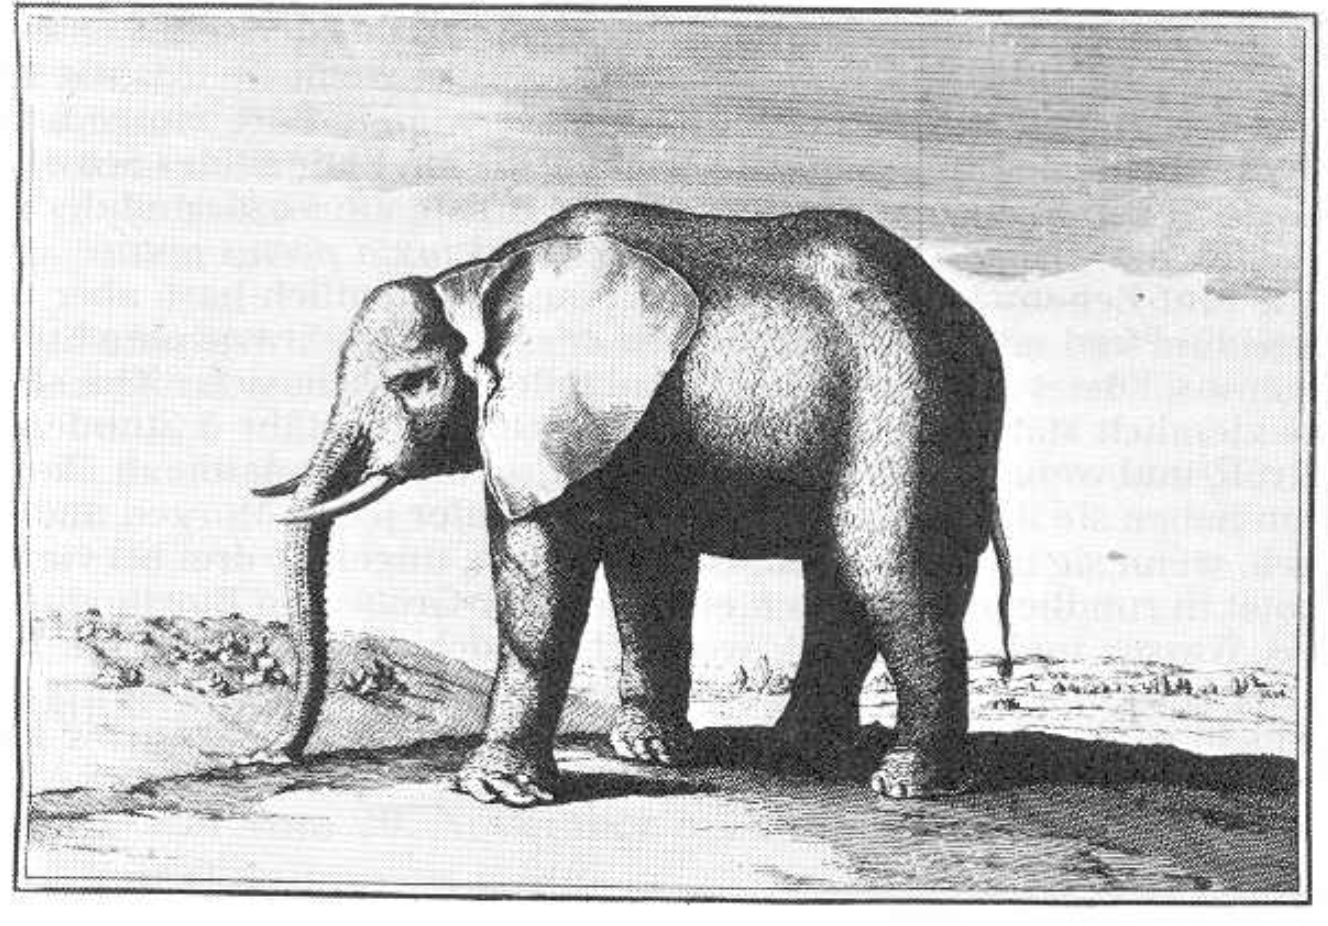 “TIL Louis XIV had an elephant at Versailles, a gift from Portugal's king in 1668. The animal became part of the Ménagerie, the palace's zoo, and was fed 80 pounds of bread, 12 pints of wine, and two buckets of soup daily. It is the only African elephant recorded in Europe between 1483 and 1862.”